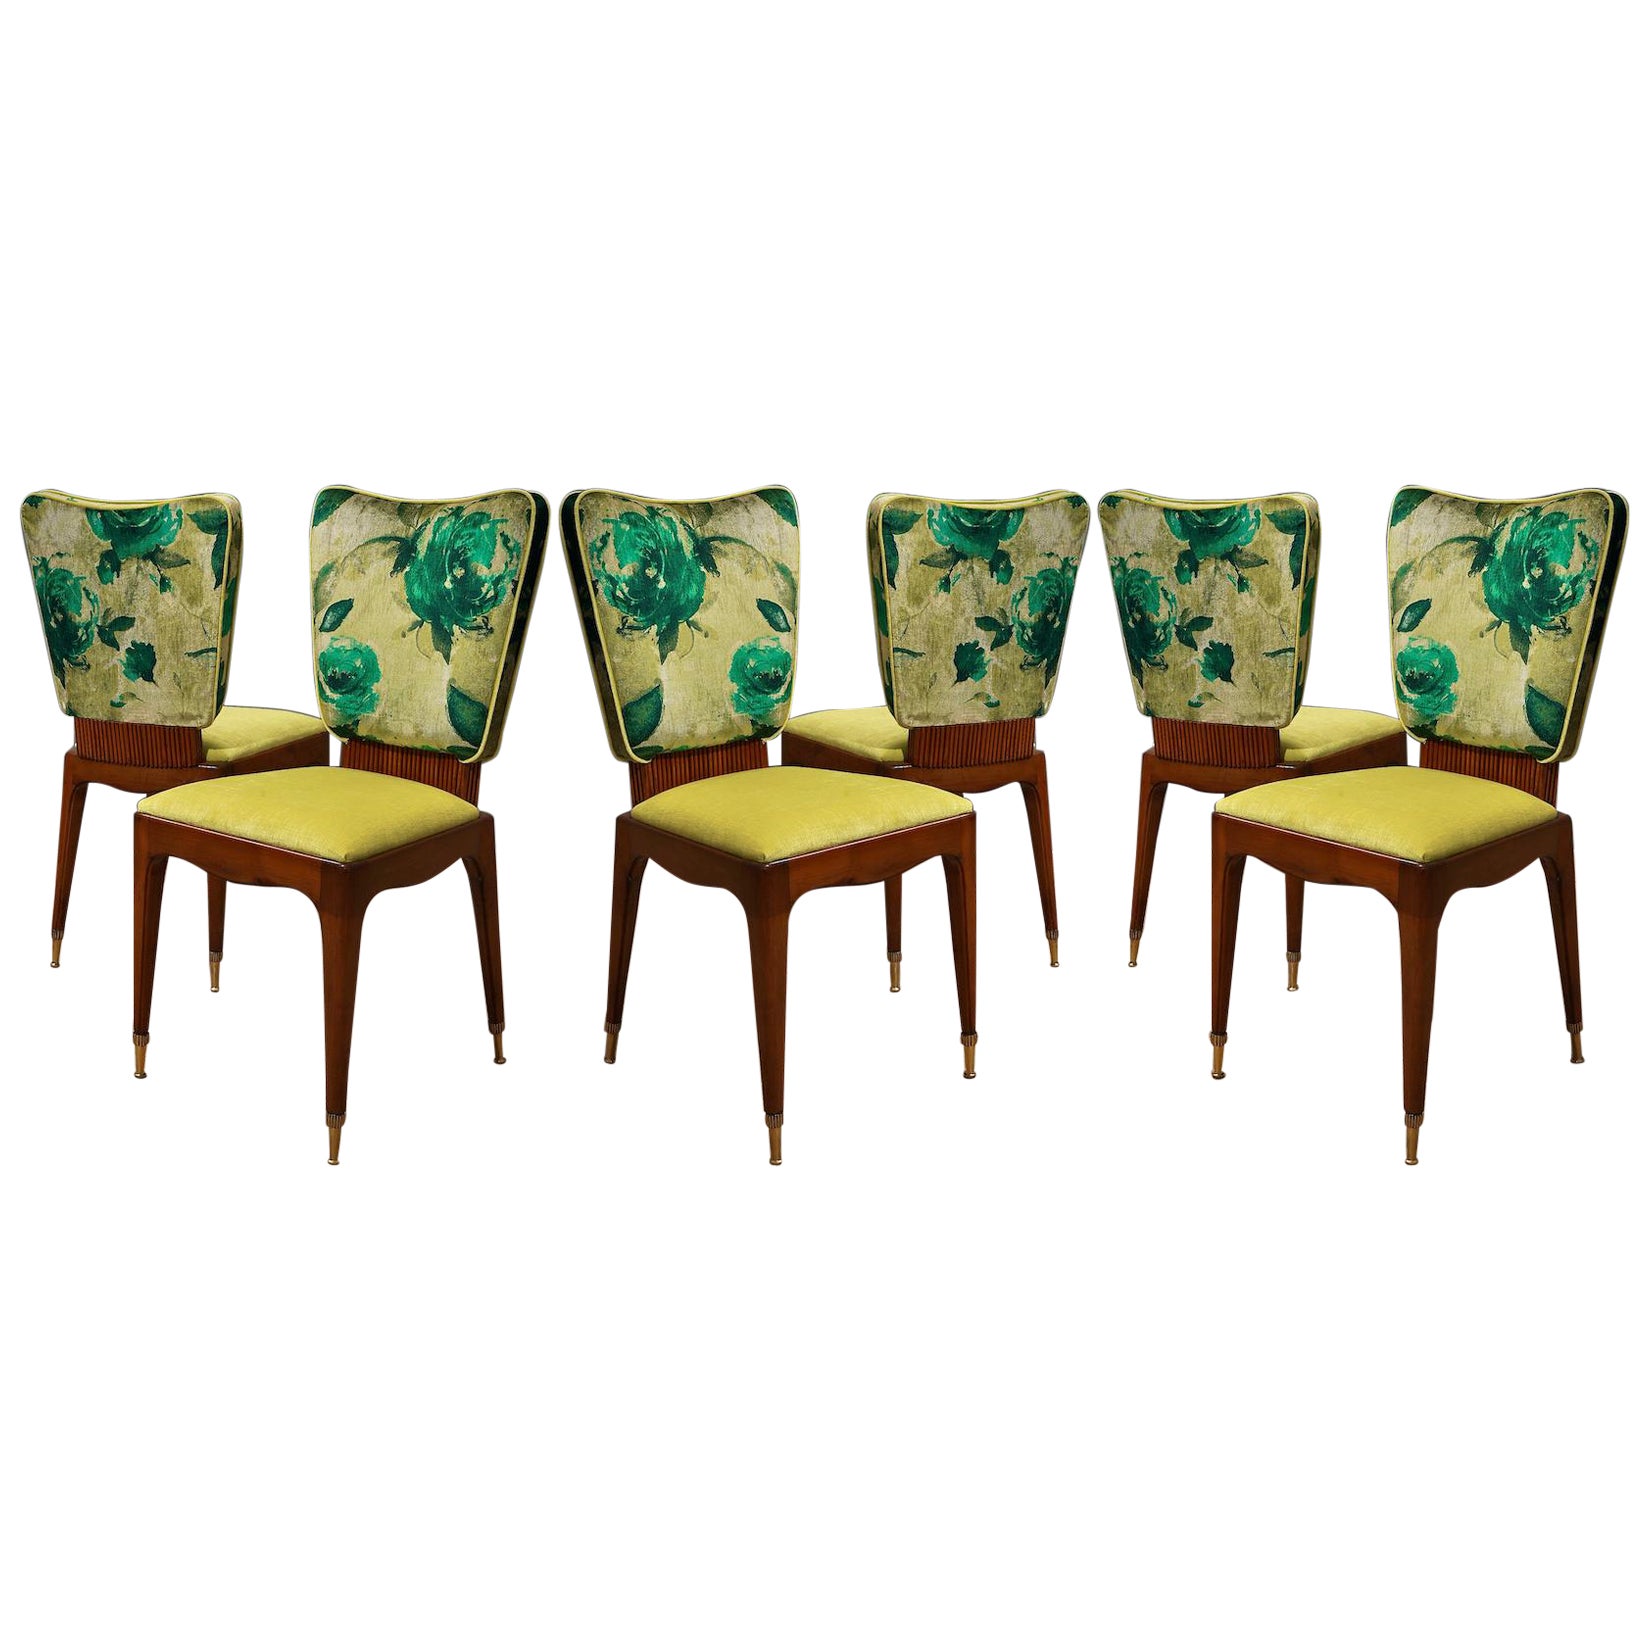 Osvaldo Borsani Attributed Cherry Wood and Floral Fabric Six Chairs, 1950